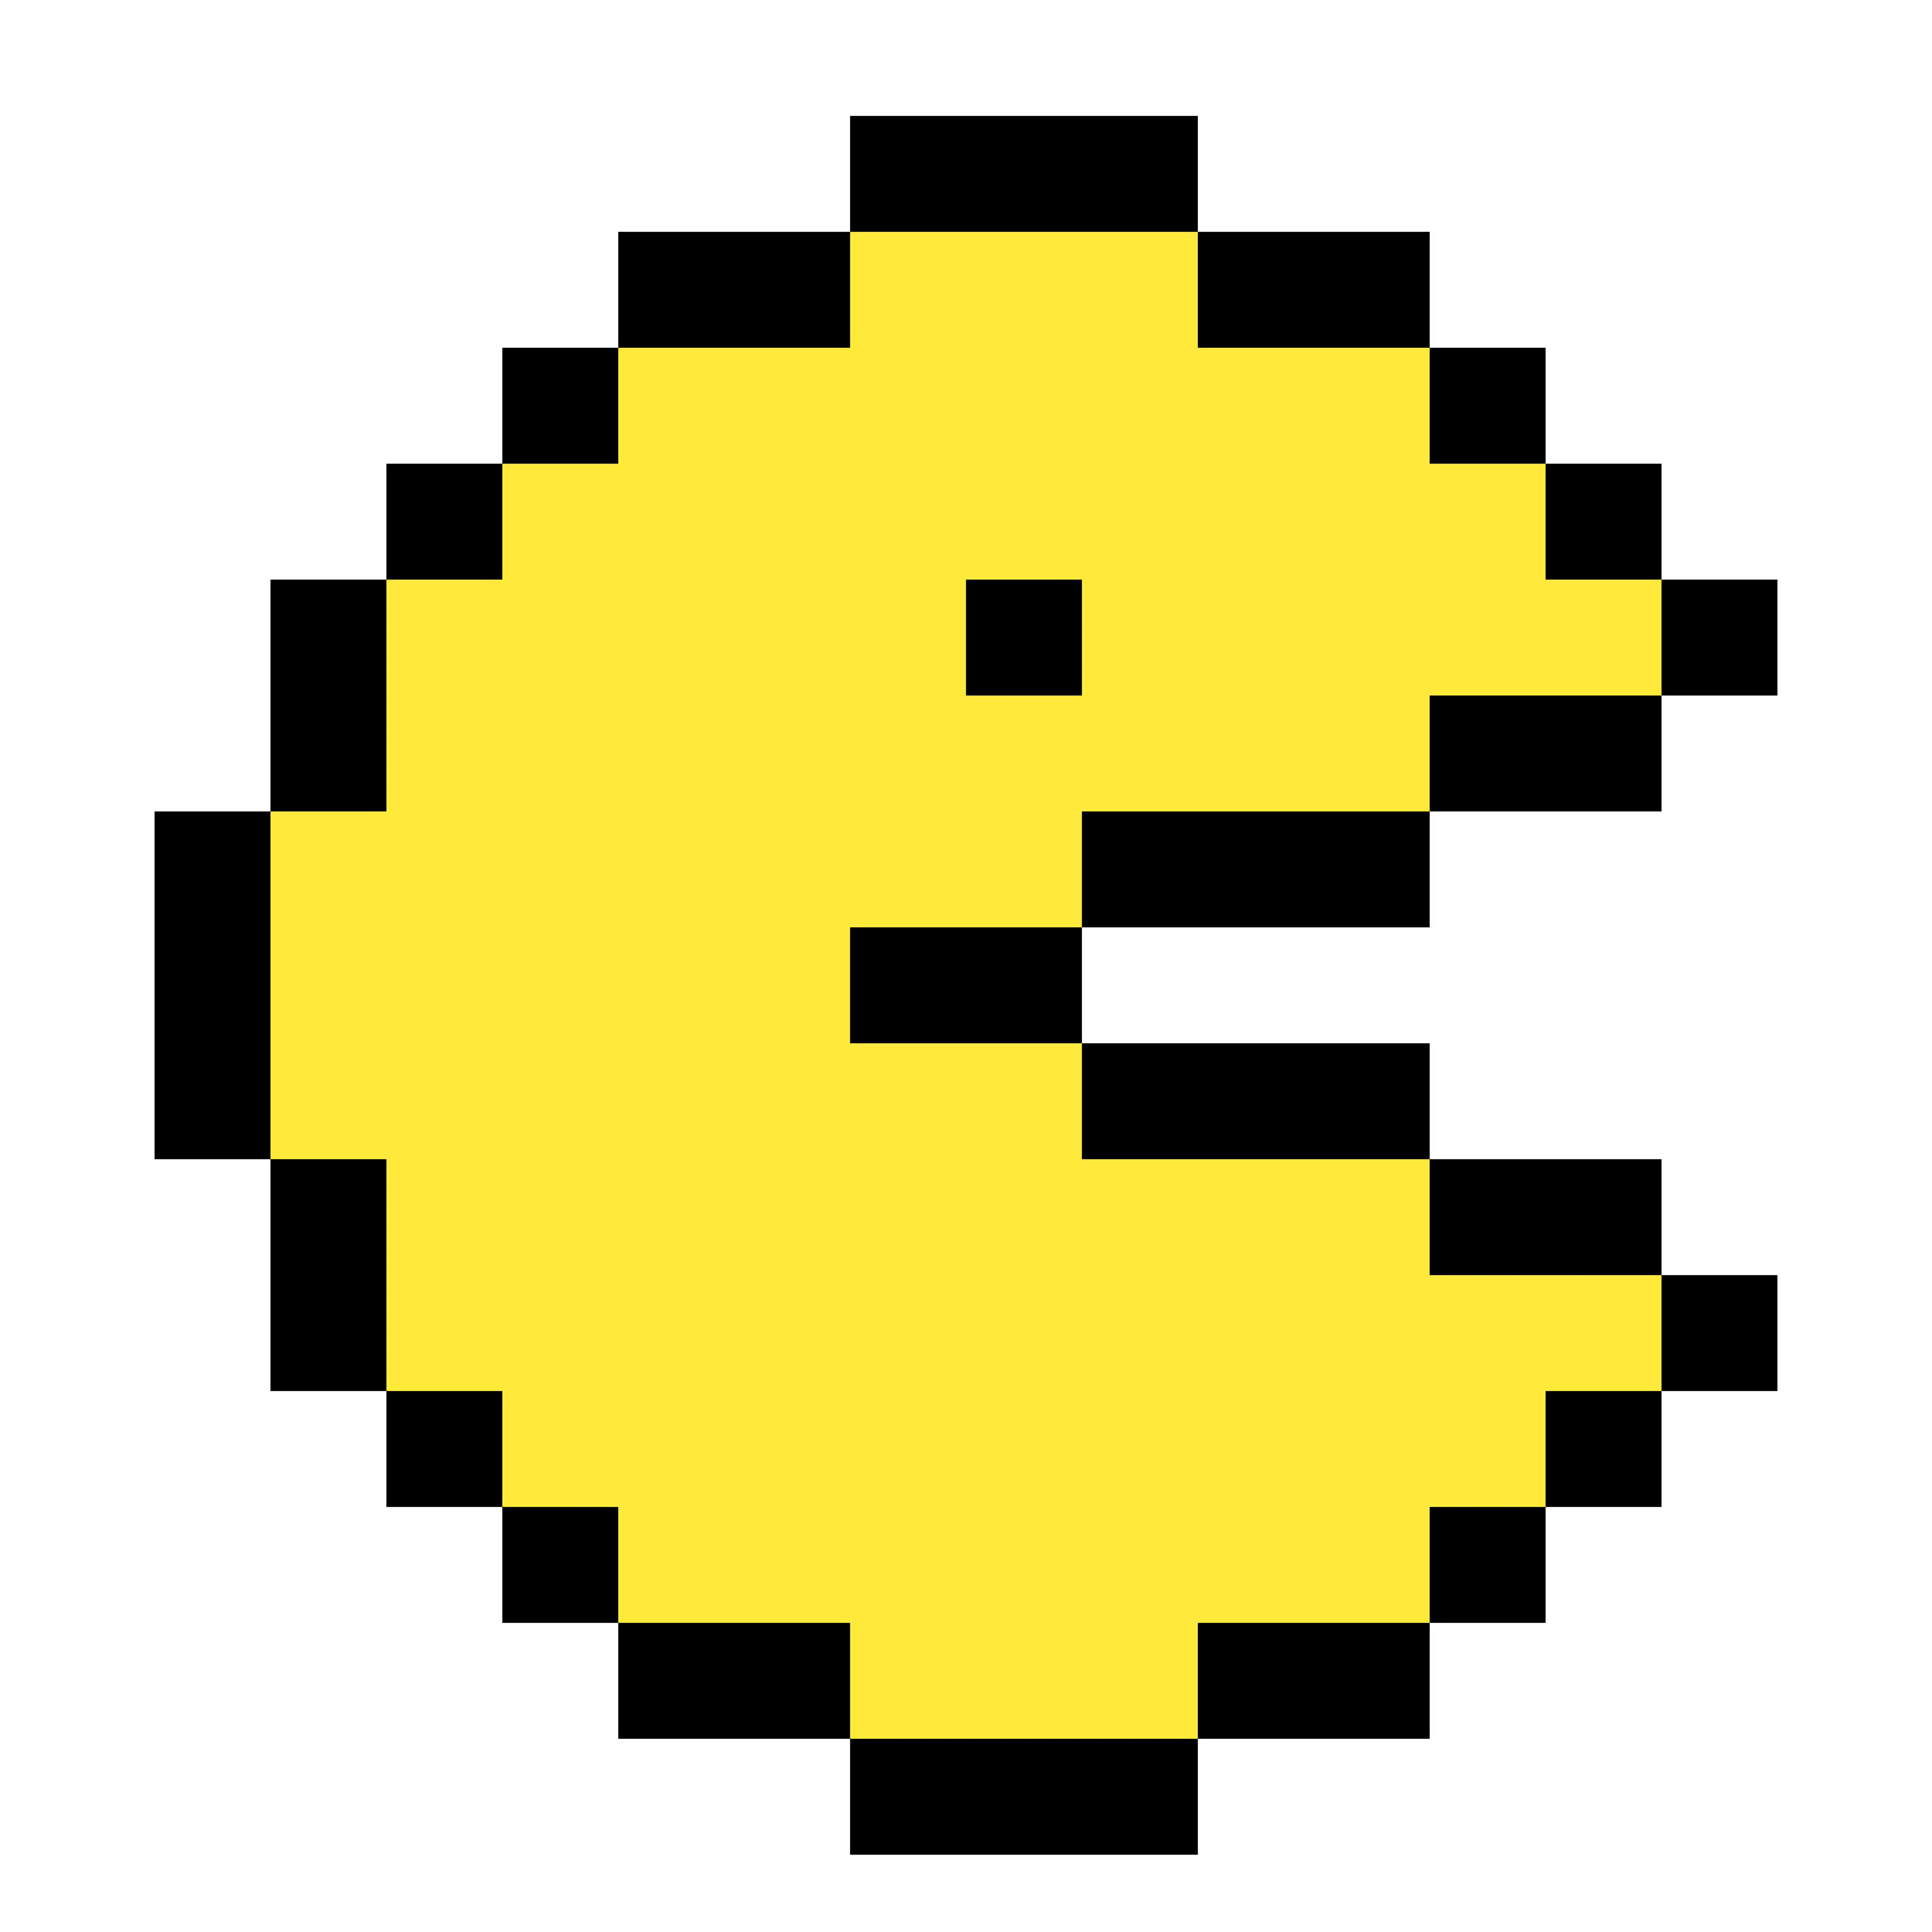 Hry Pacman